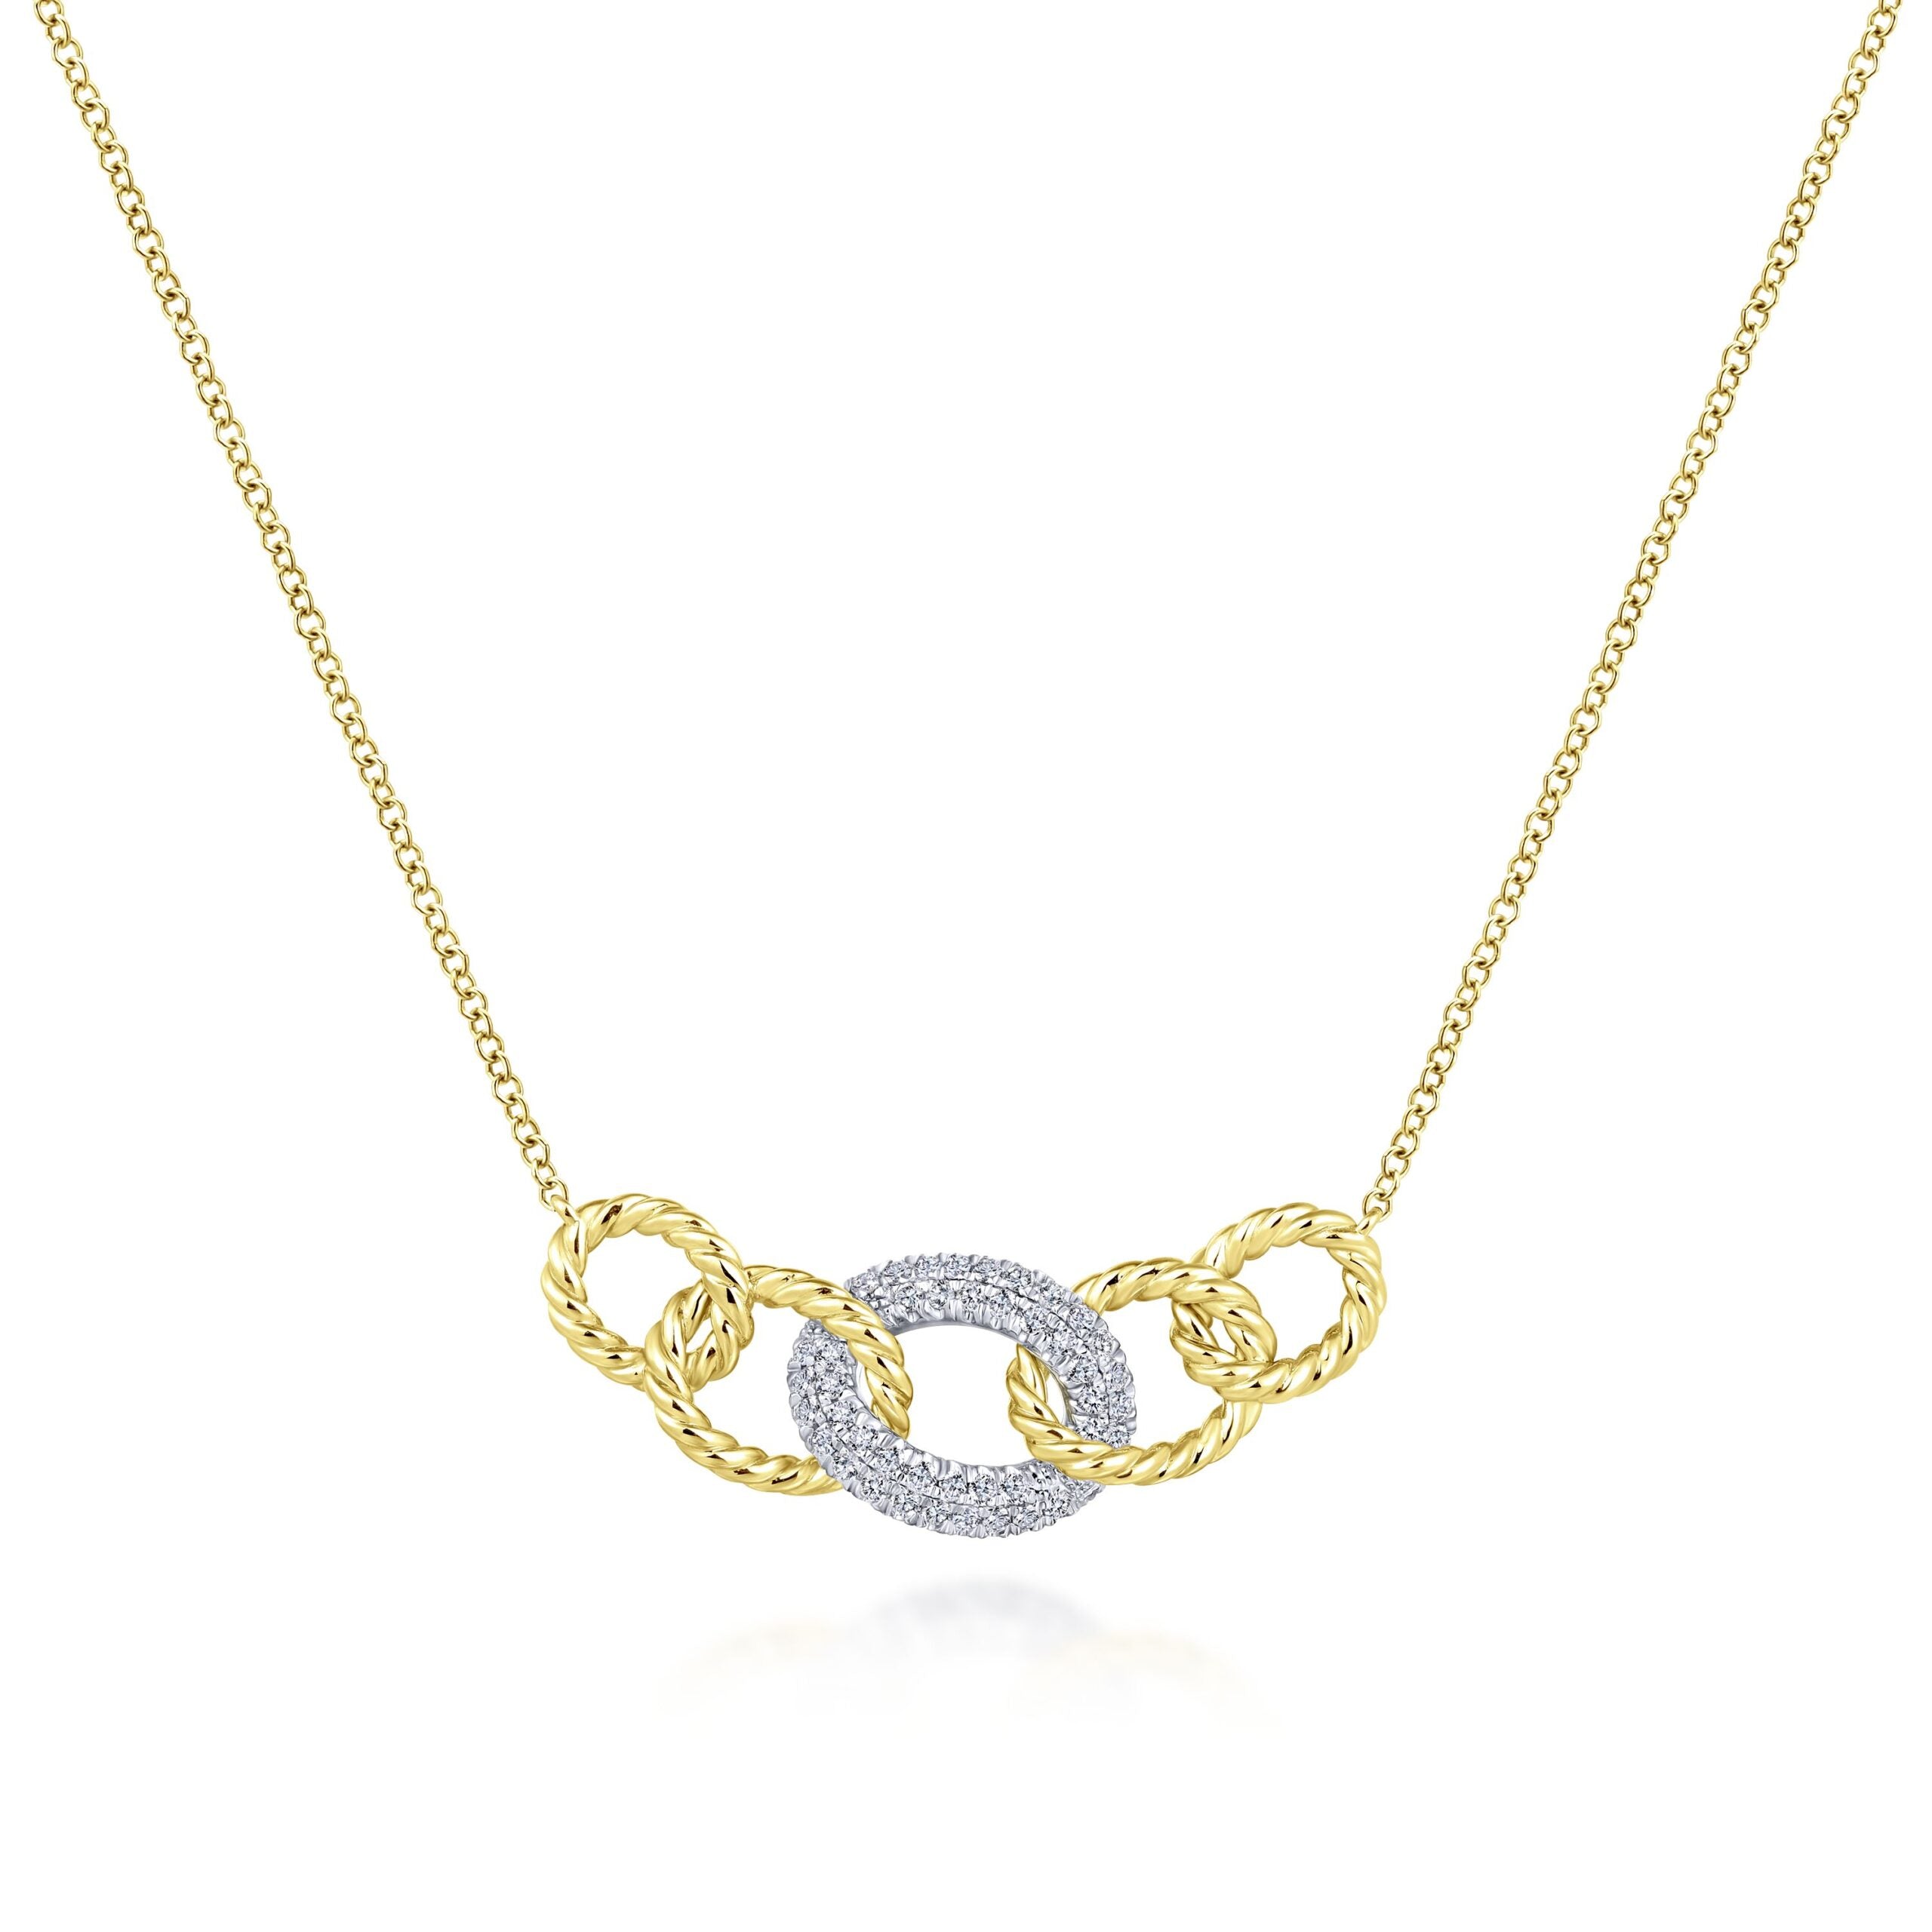 14K Yellow-White Gold Twisted Rope Link Necklace with Pavé Diamond Link Station